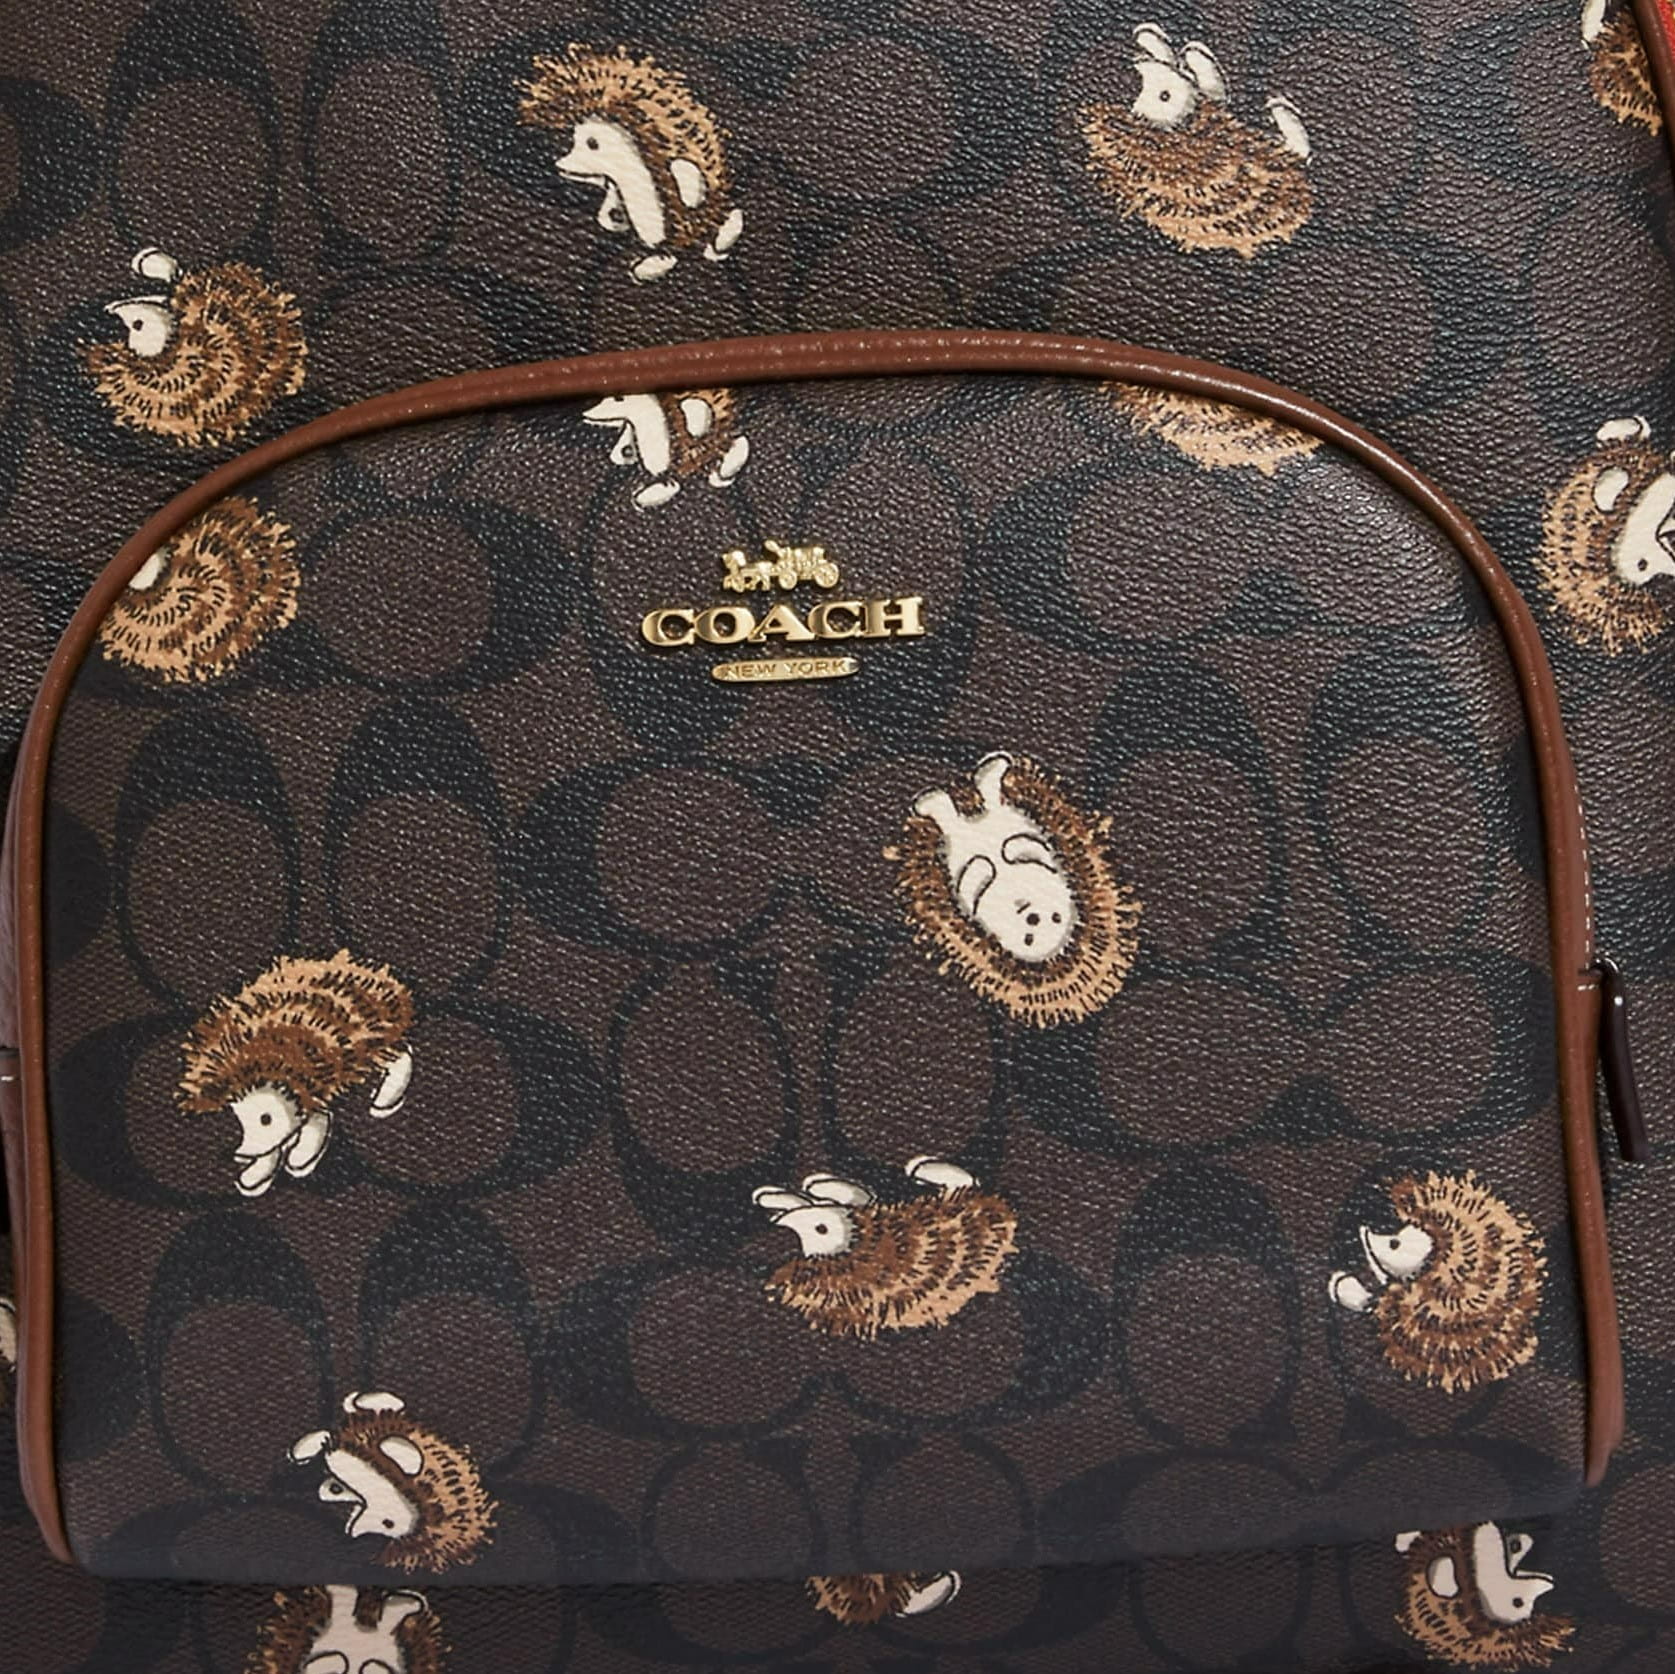 BALO COACH HỌA TIẾT CHÚ NHÍM COURT BACKPACK IN SIGNATURE CANVAS WITH HEDGEHOG PRINT 1